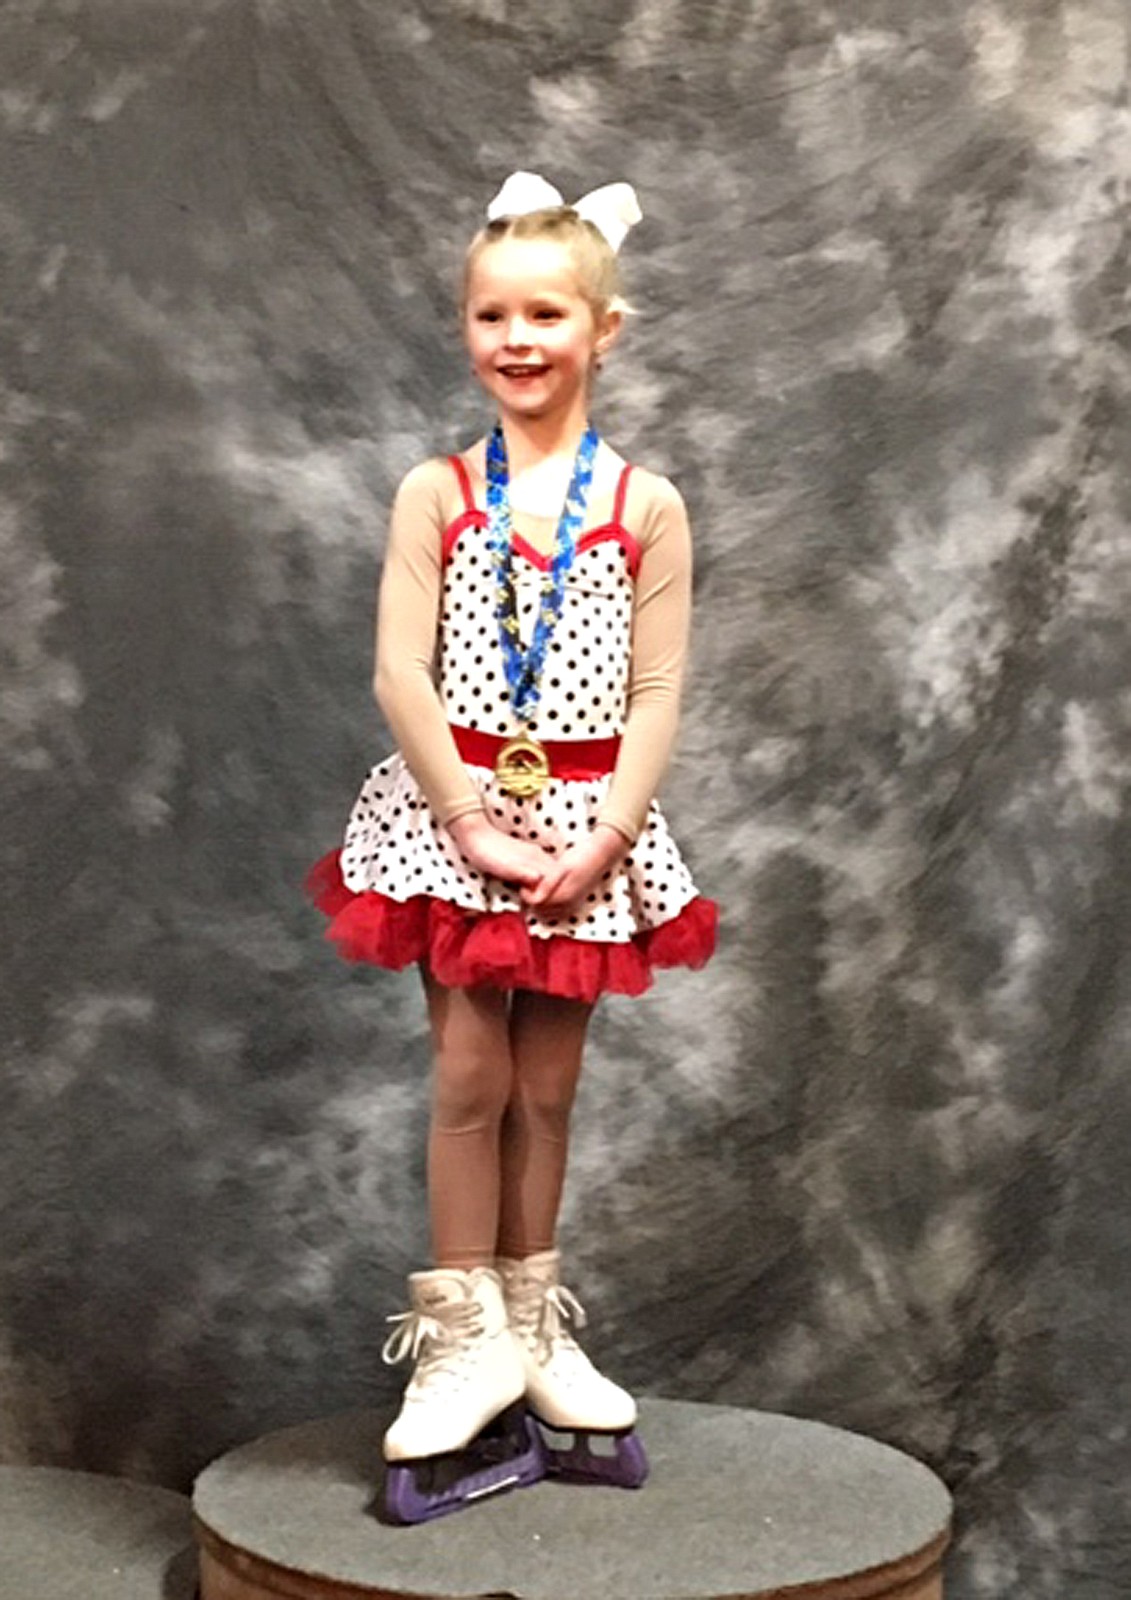 Harper MacIntyre earned first place during a recent skating competition in Missoula. (Courtesy photo)